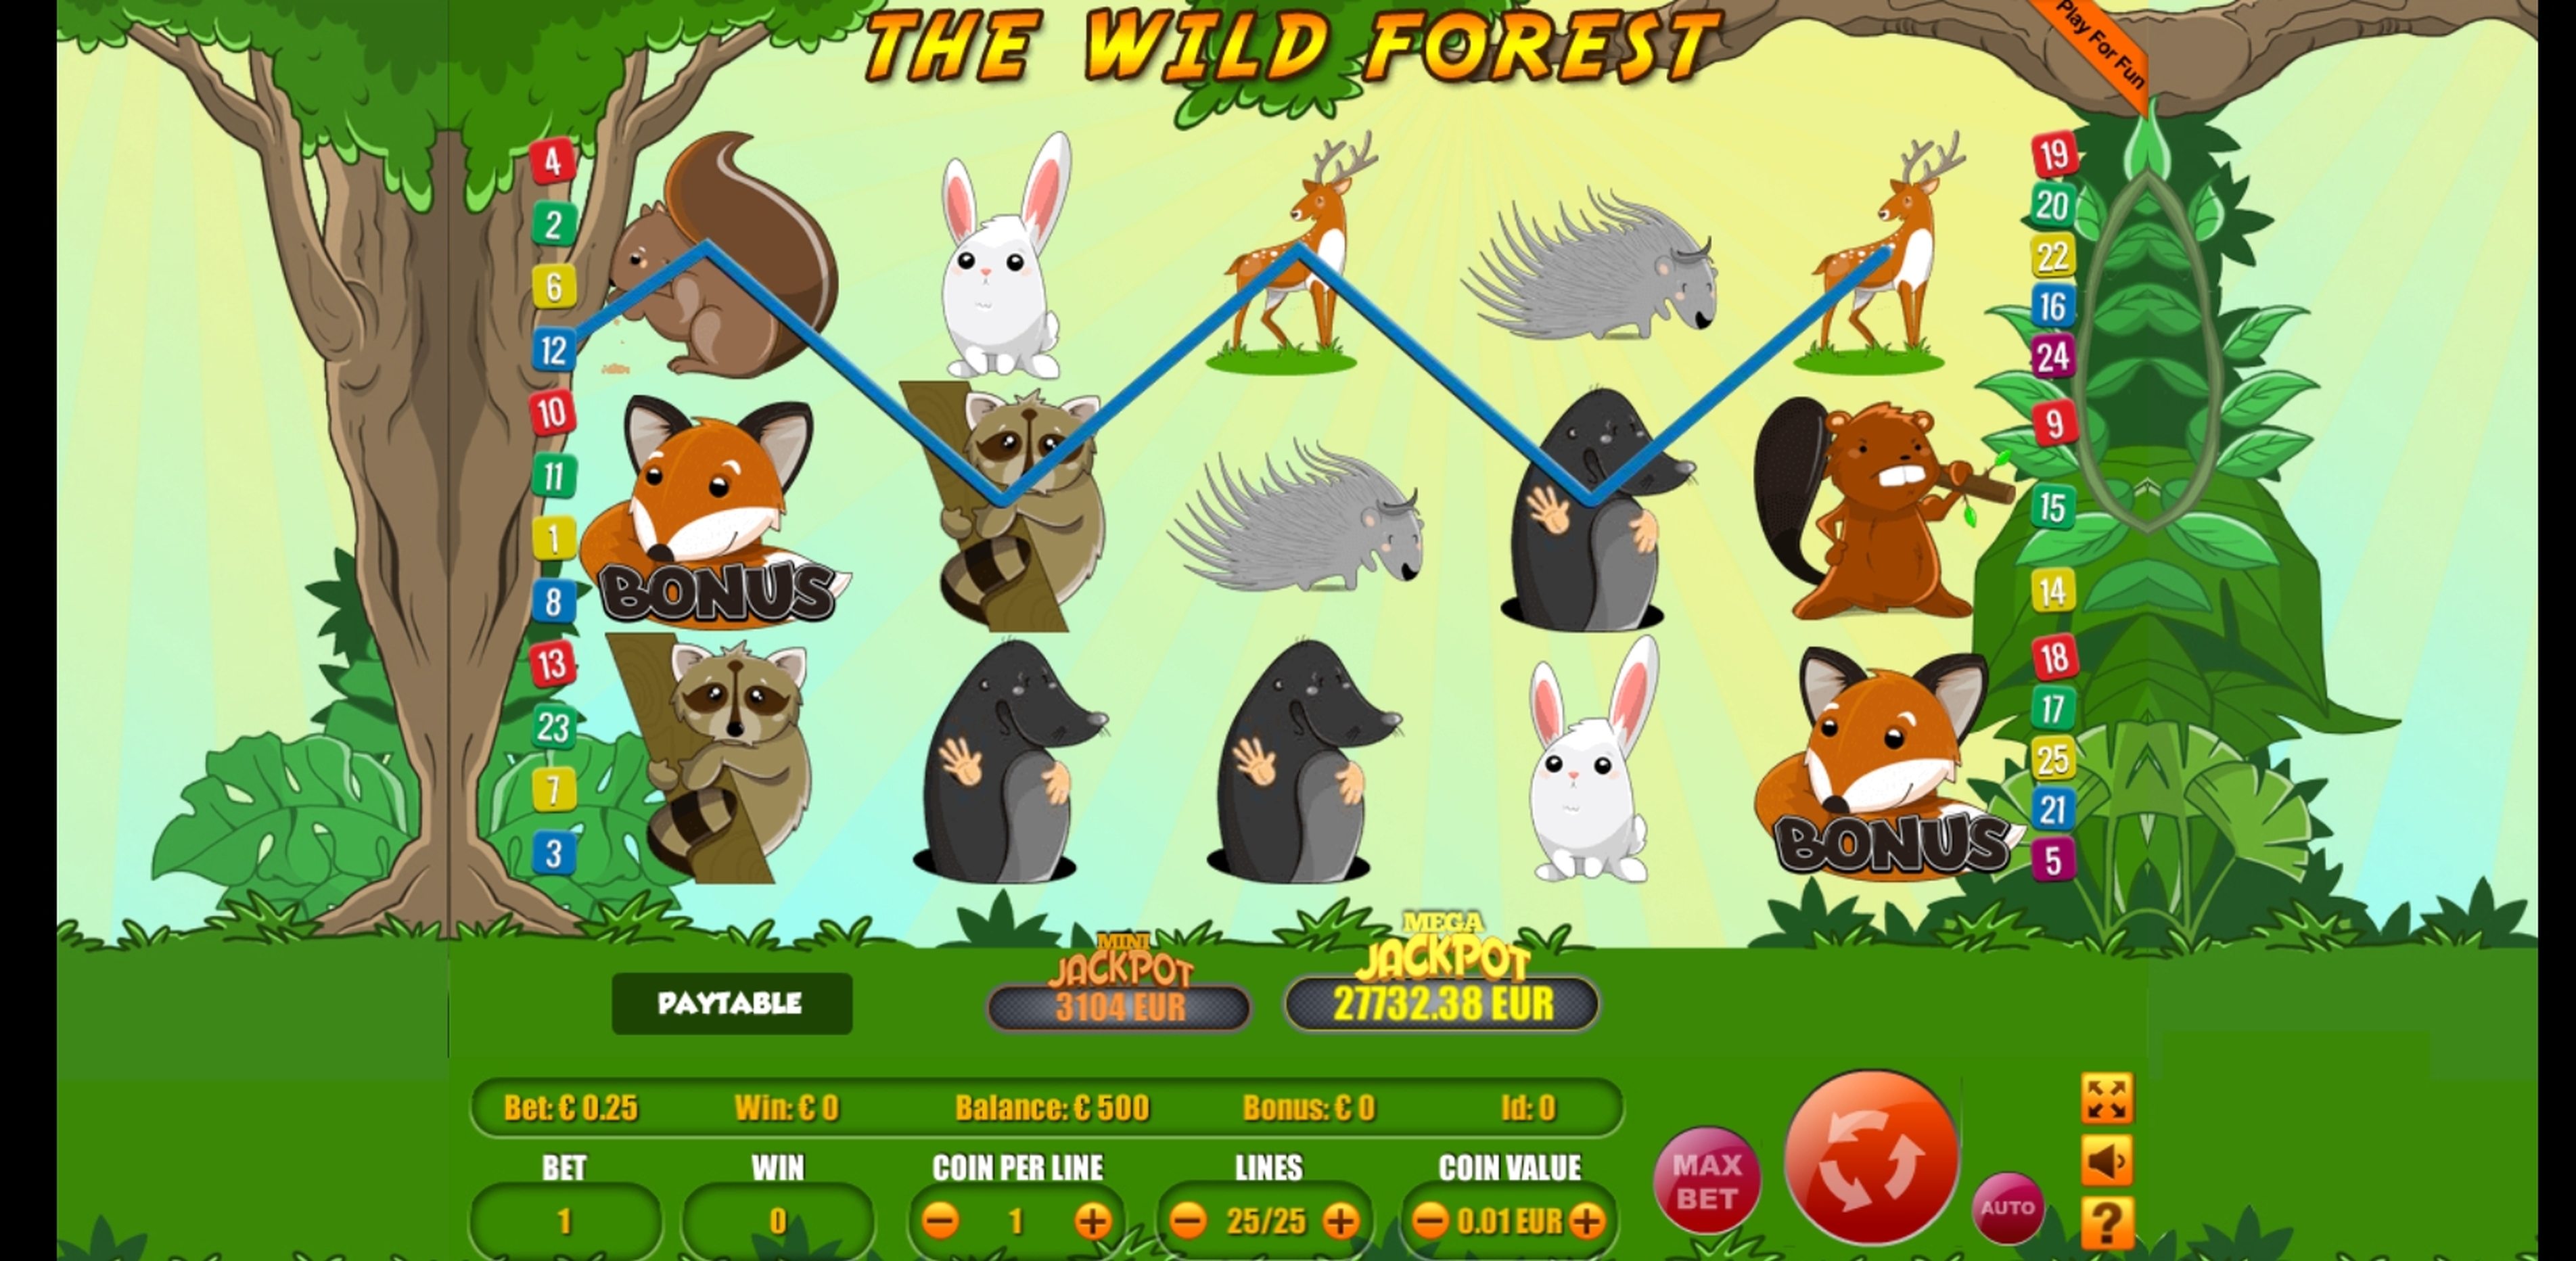 The Wild Forest demo